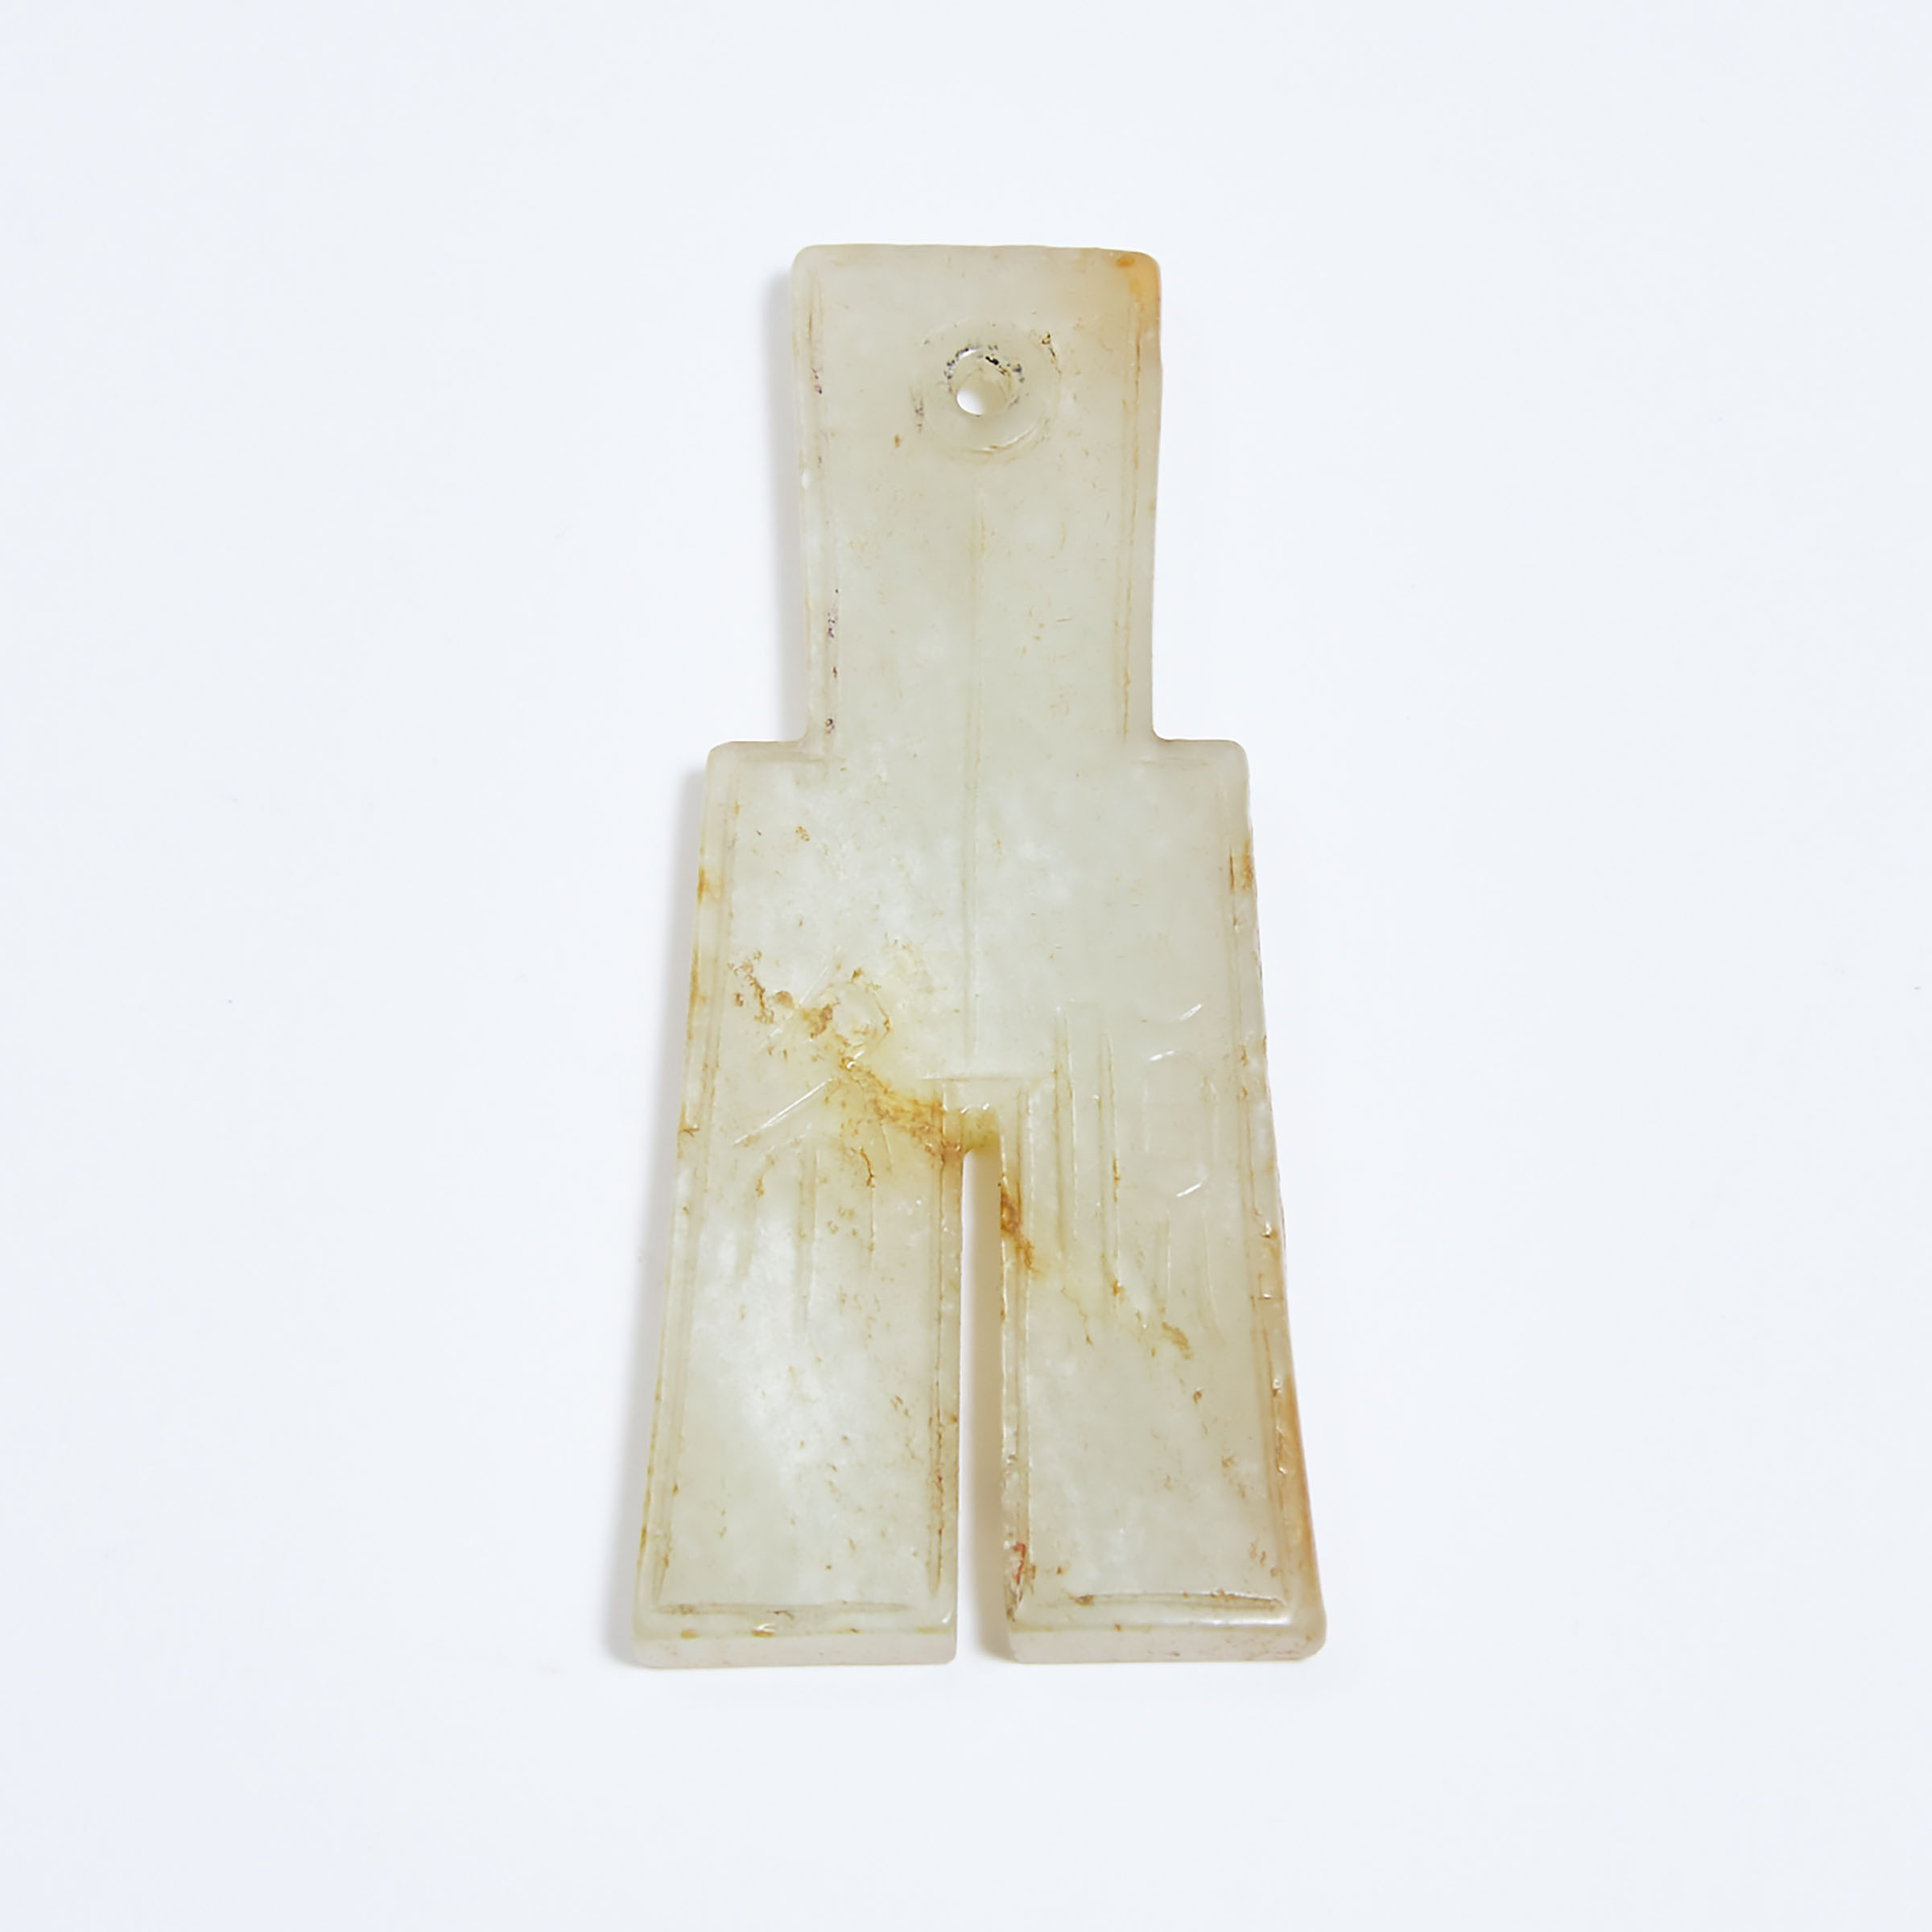 A White and Russet Jade 'Spade-Money' Shaped Plaque, Late Ming/Early Qing Dynasty